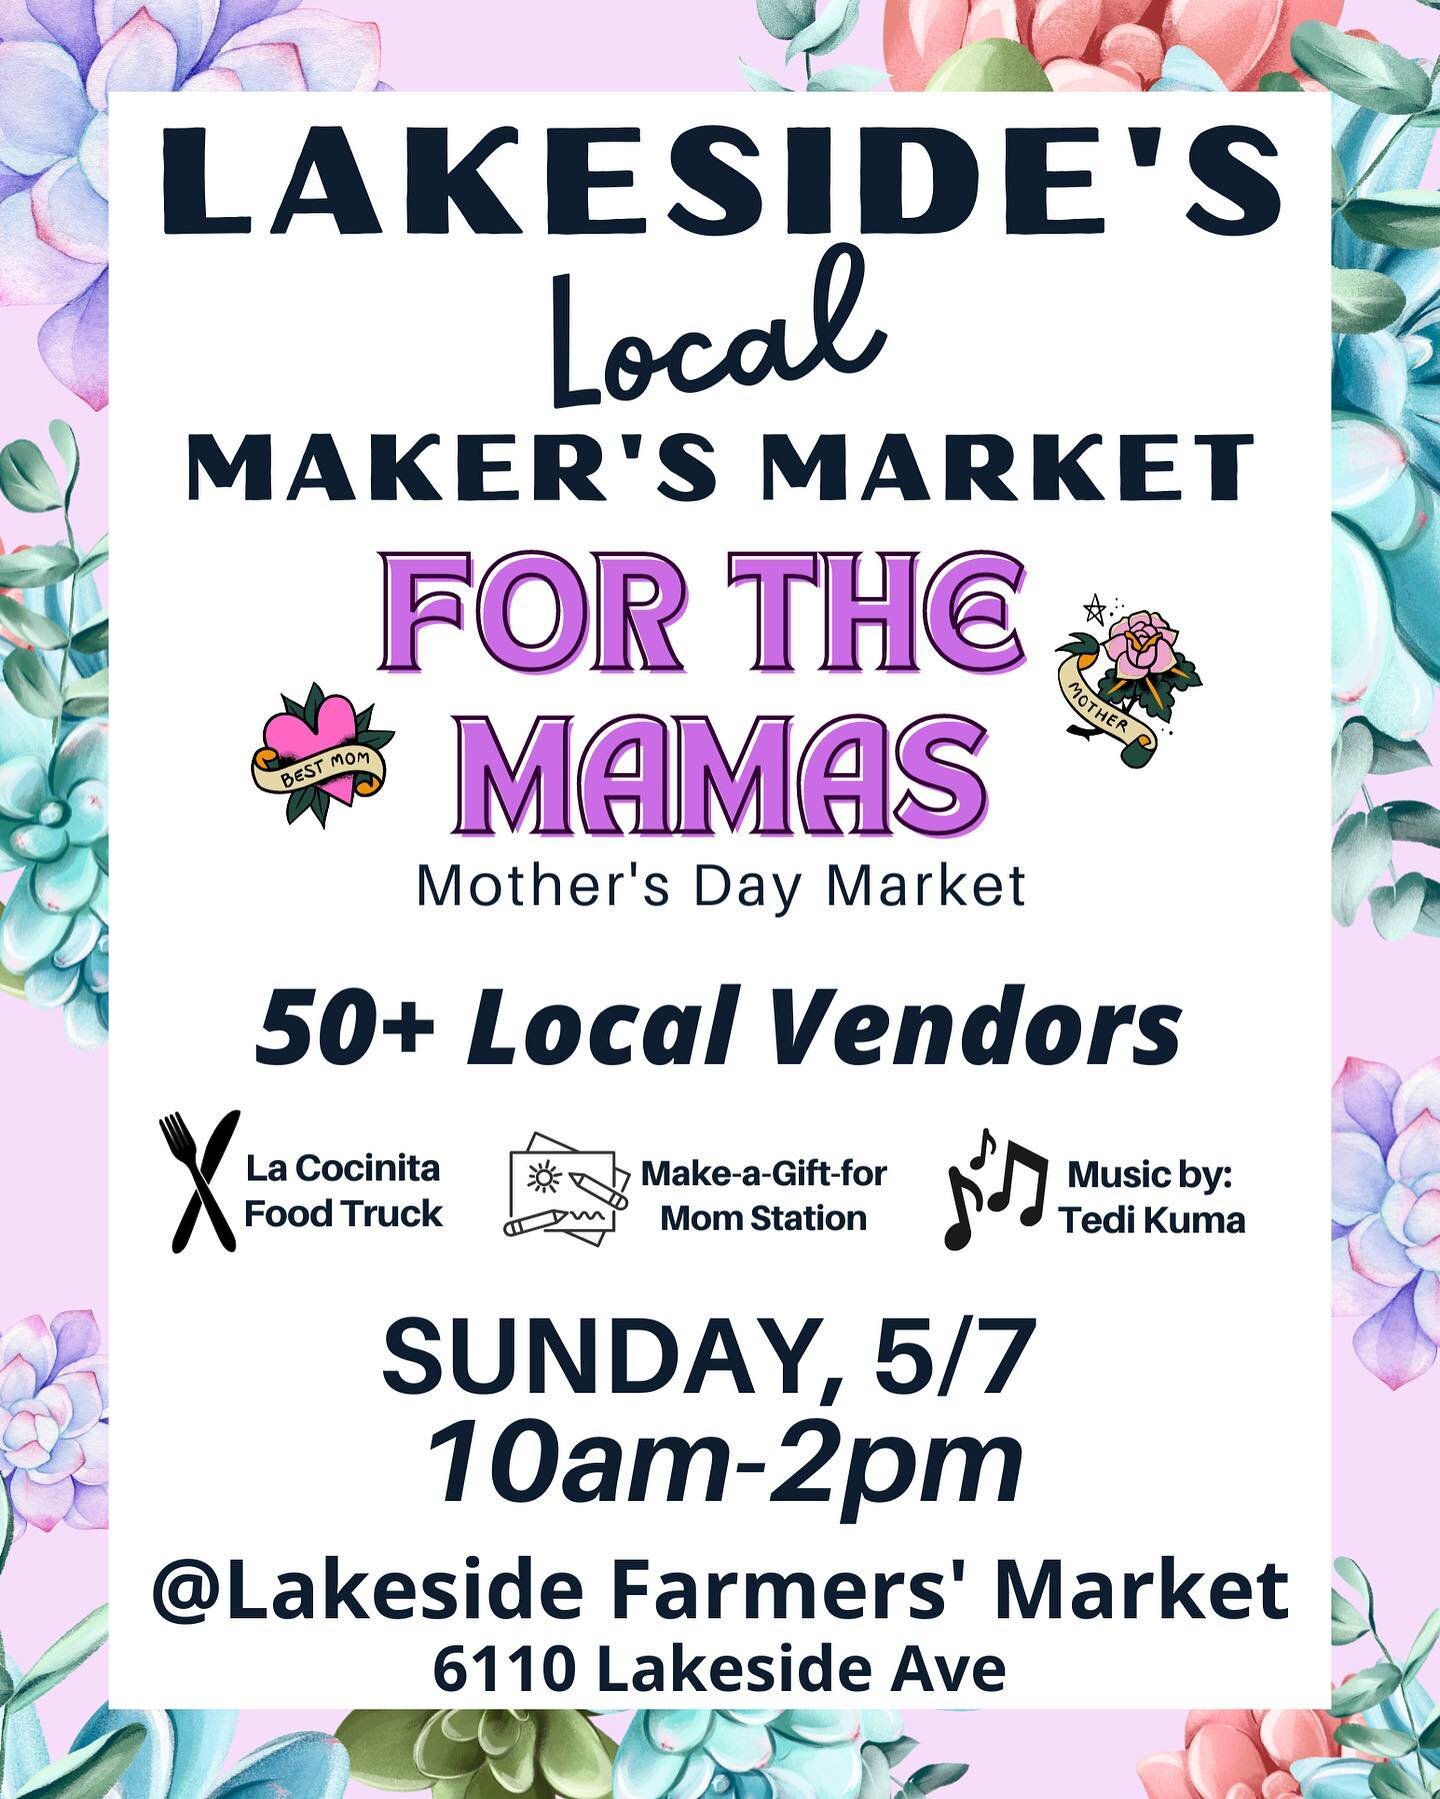 Don&rsquo;t forget about the Lakeside Maker&rsquo;s Market tomorrow! My booth will still be there for you to pick up that charcuterie board your mom always wanted! 

@lakesidemarketrva